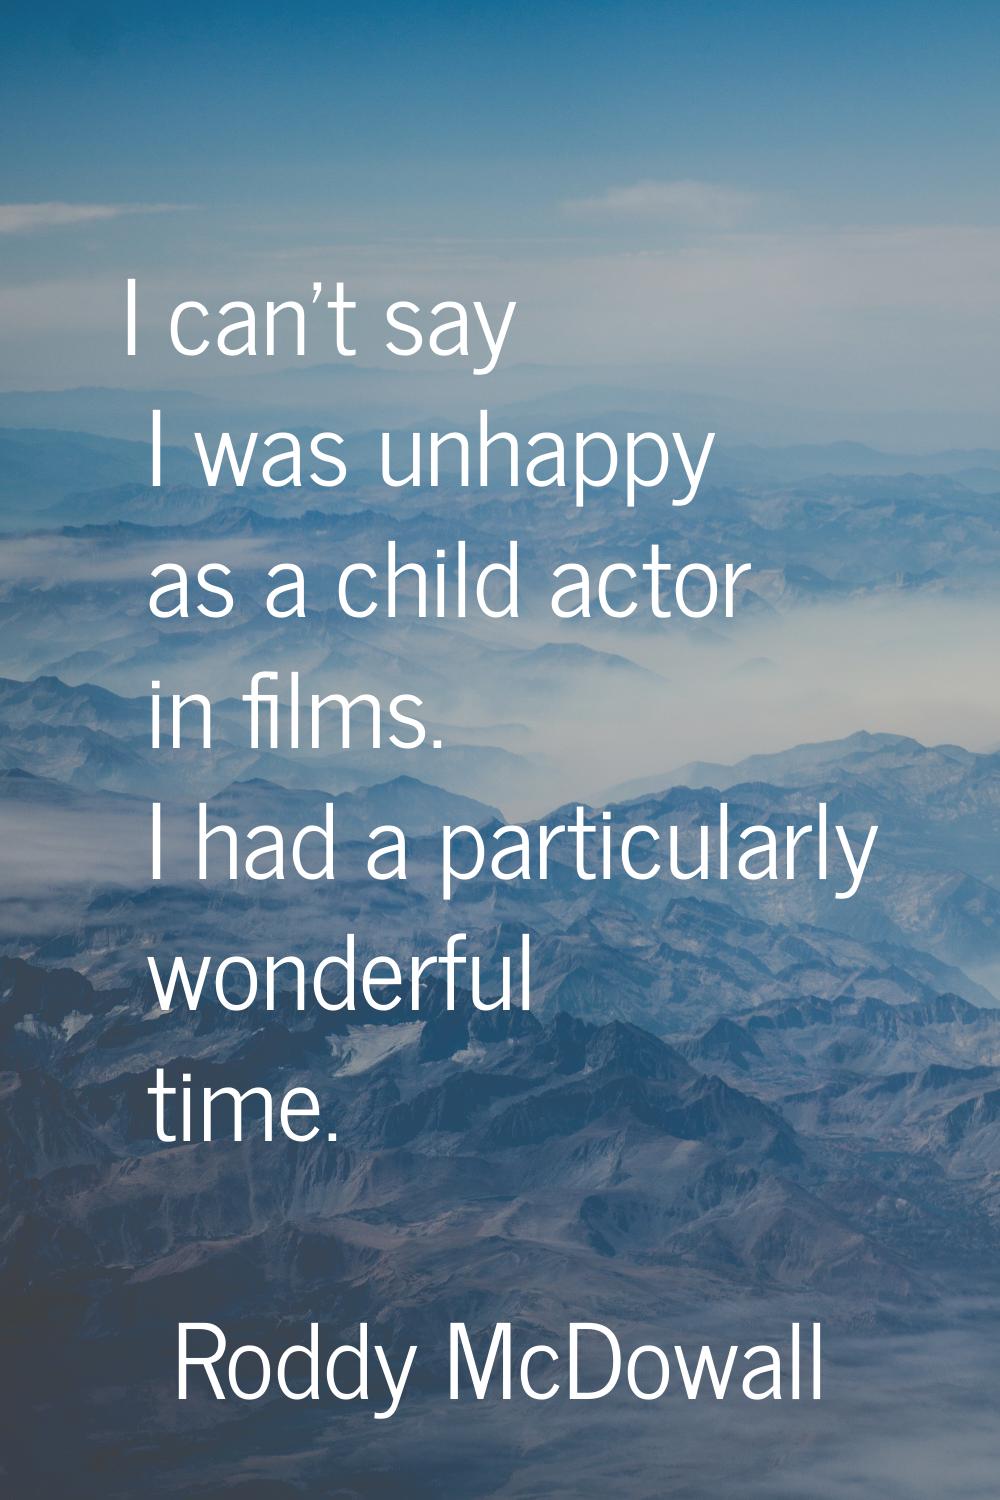 I can't say I was unhappy as a child actor in films. I had a particularly wonderful time.